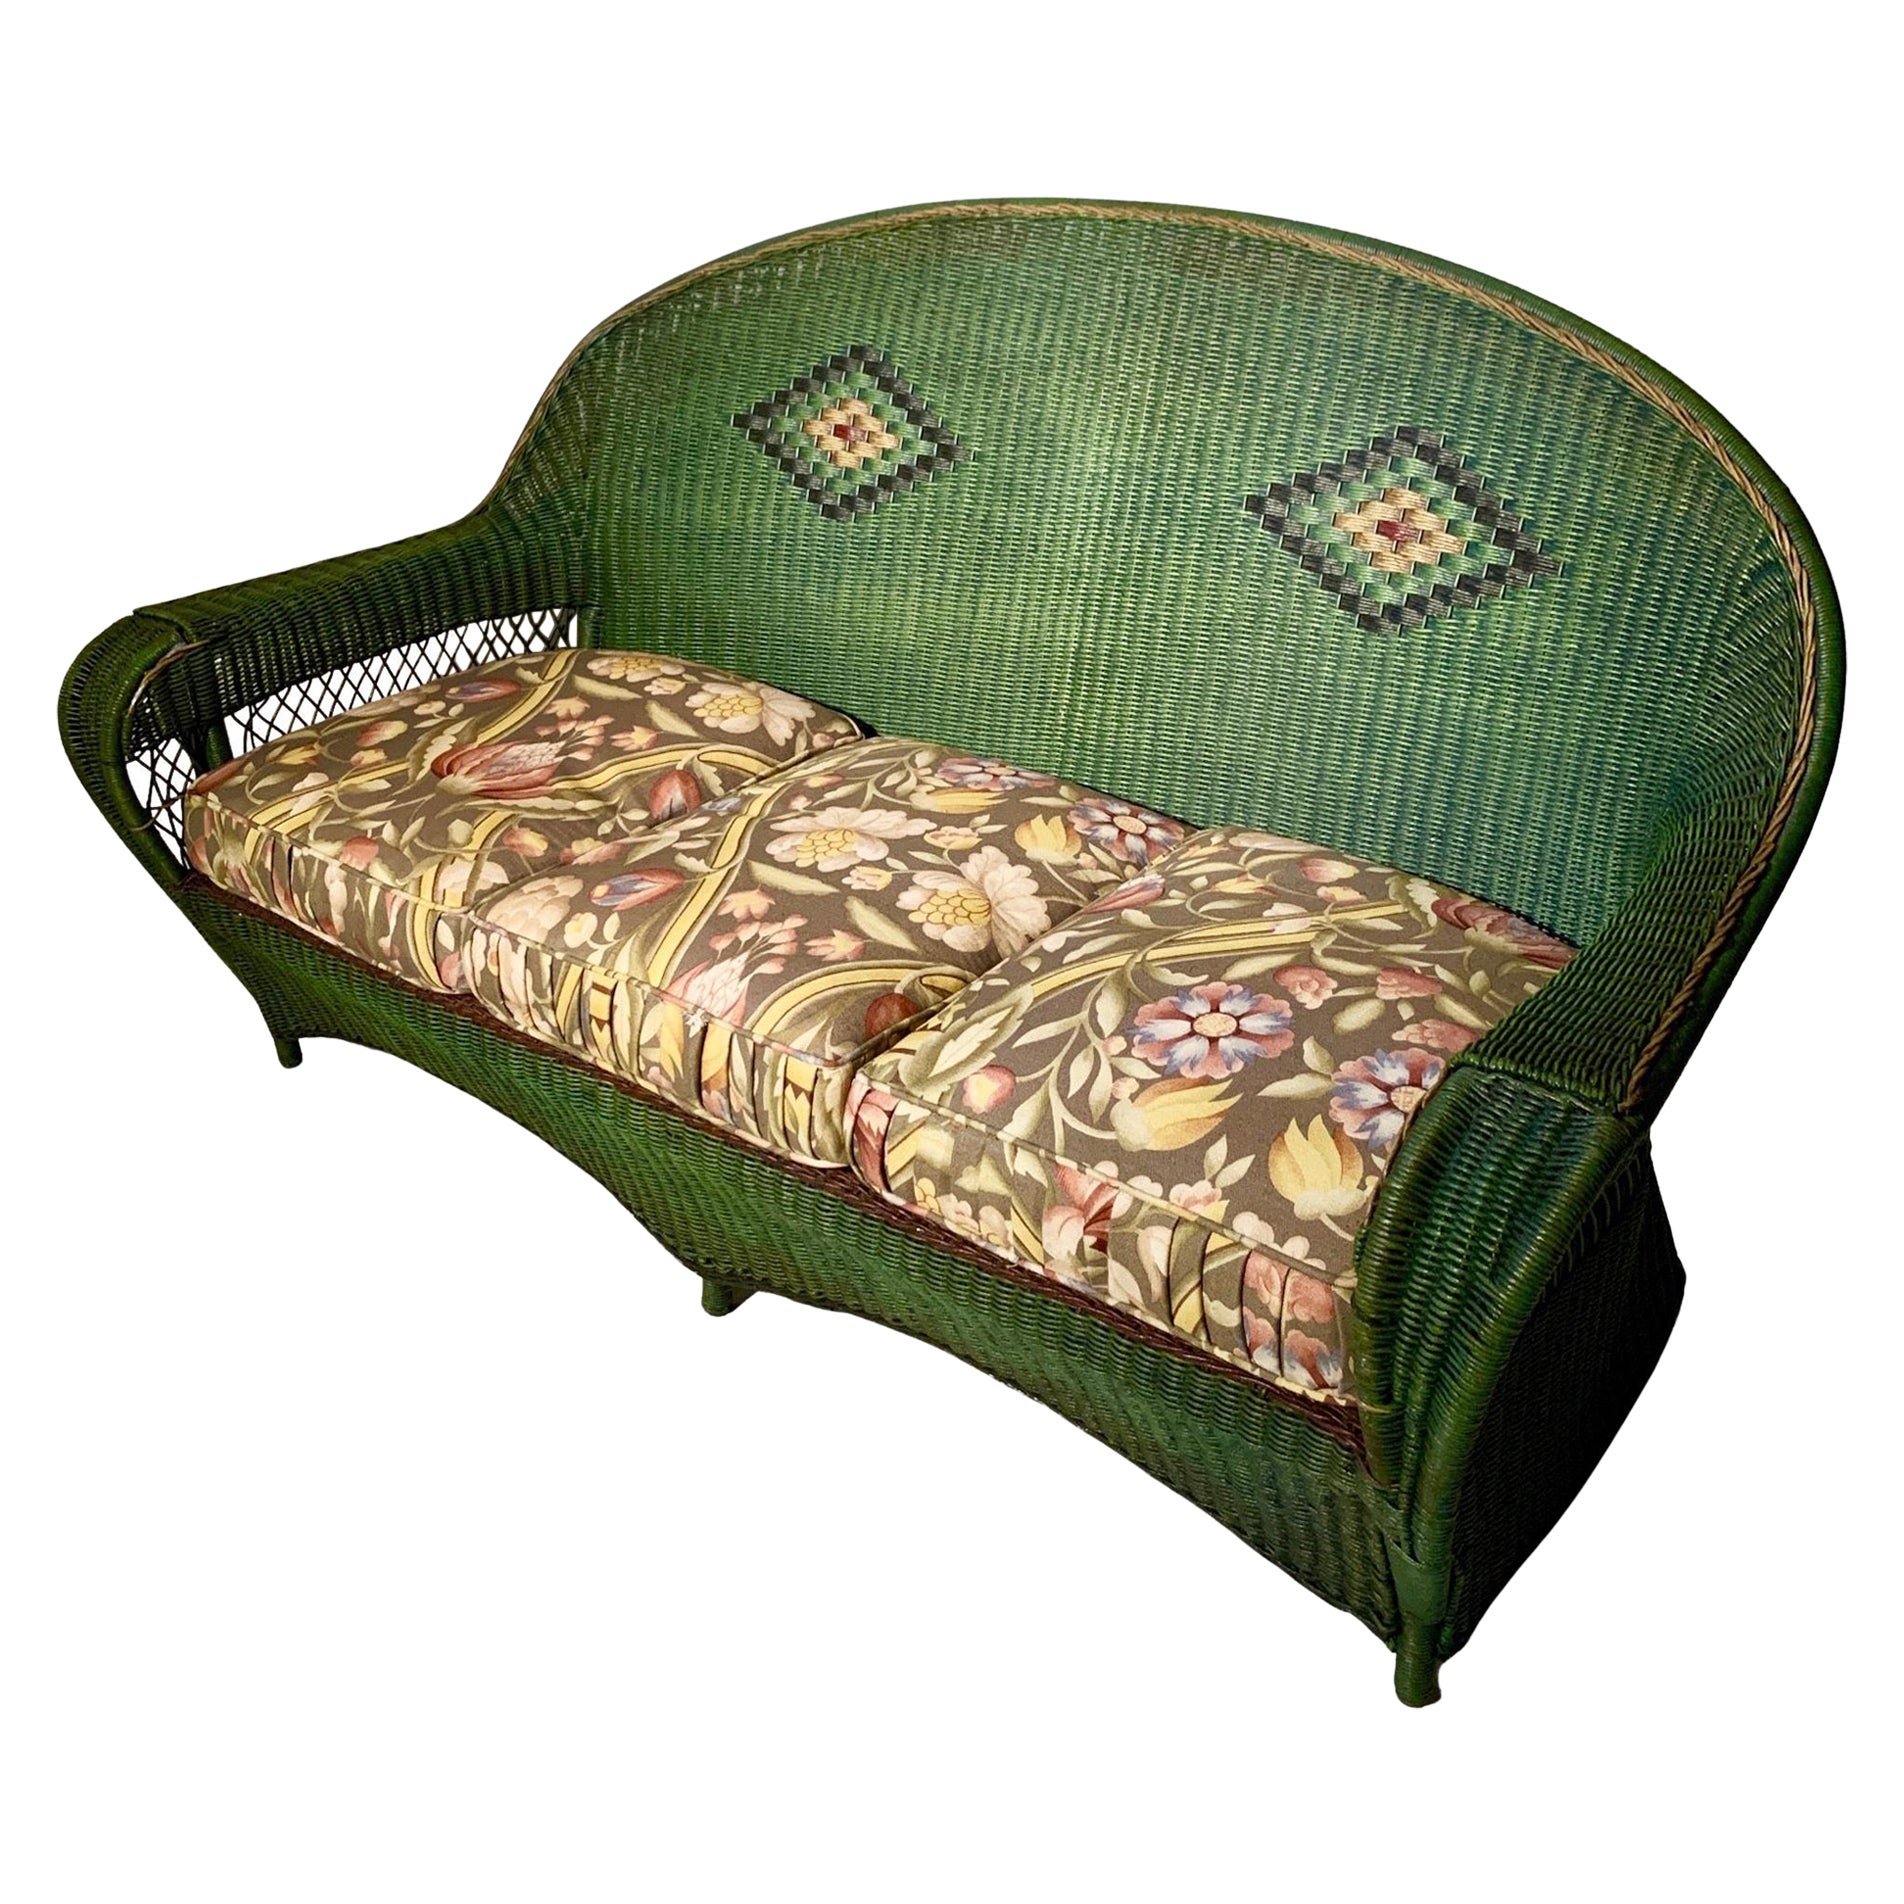  Arts & Crafts Style Green Three Seat Wicker Sofa For Sale